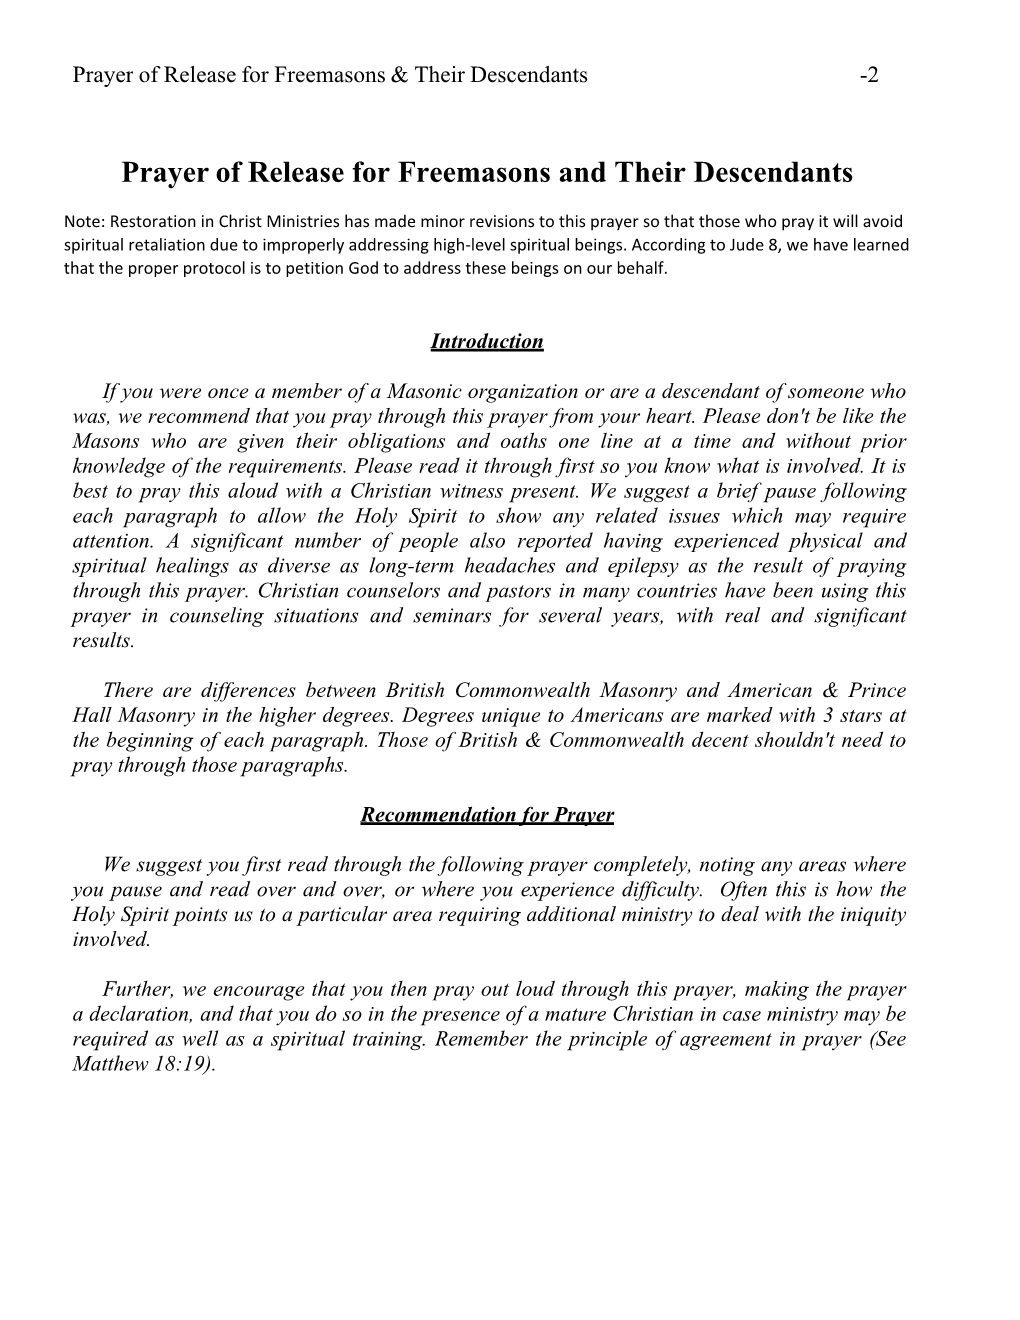 Prayer of Release for Freemasons and Their Descendants